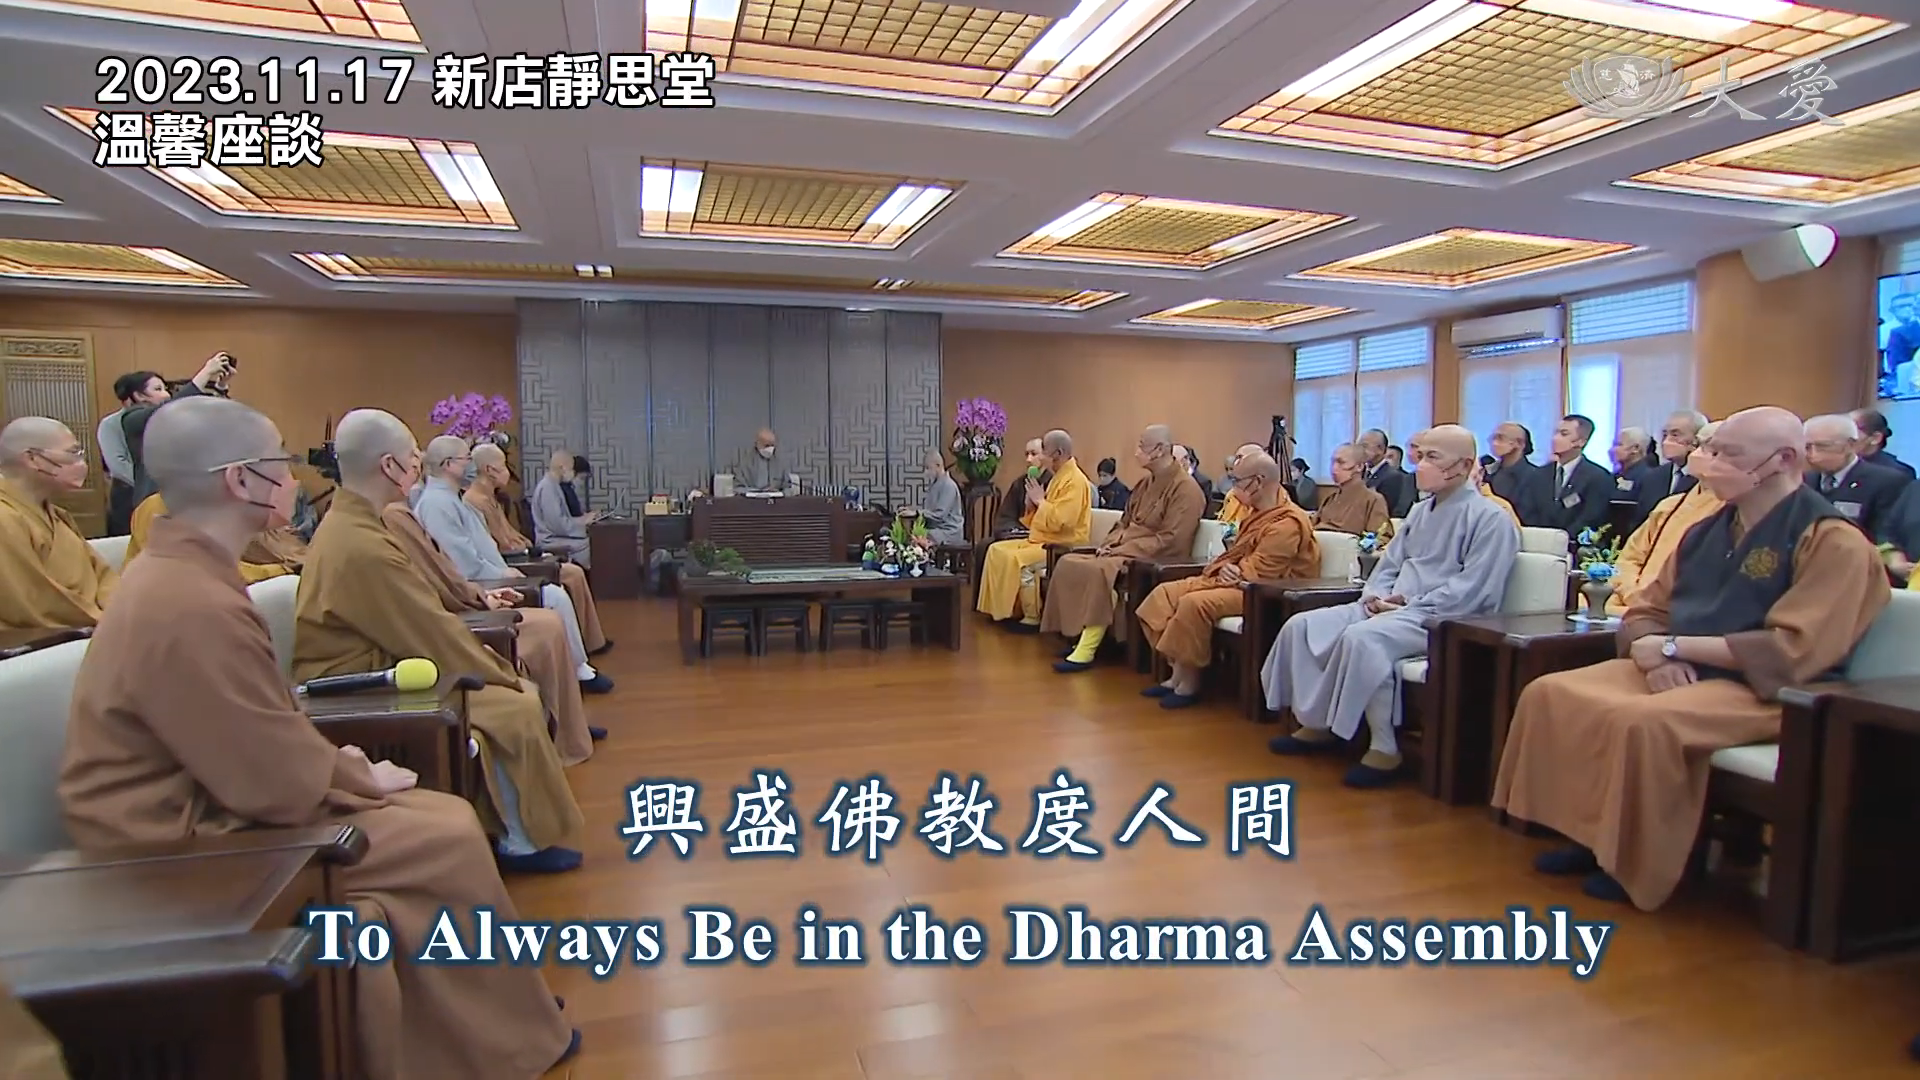 To Always Be in the Dharma Assembly